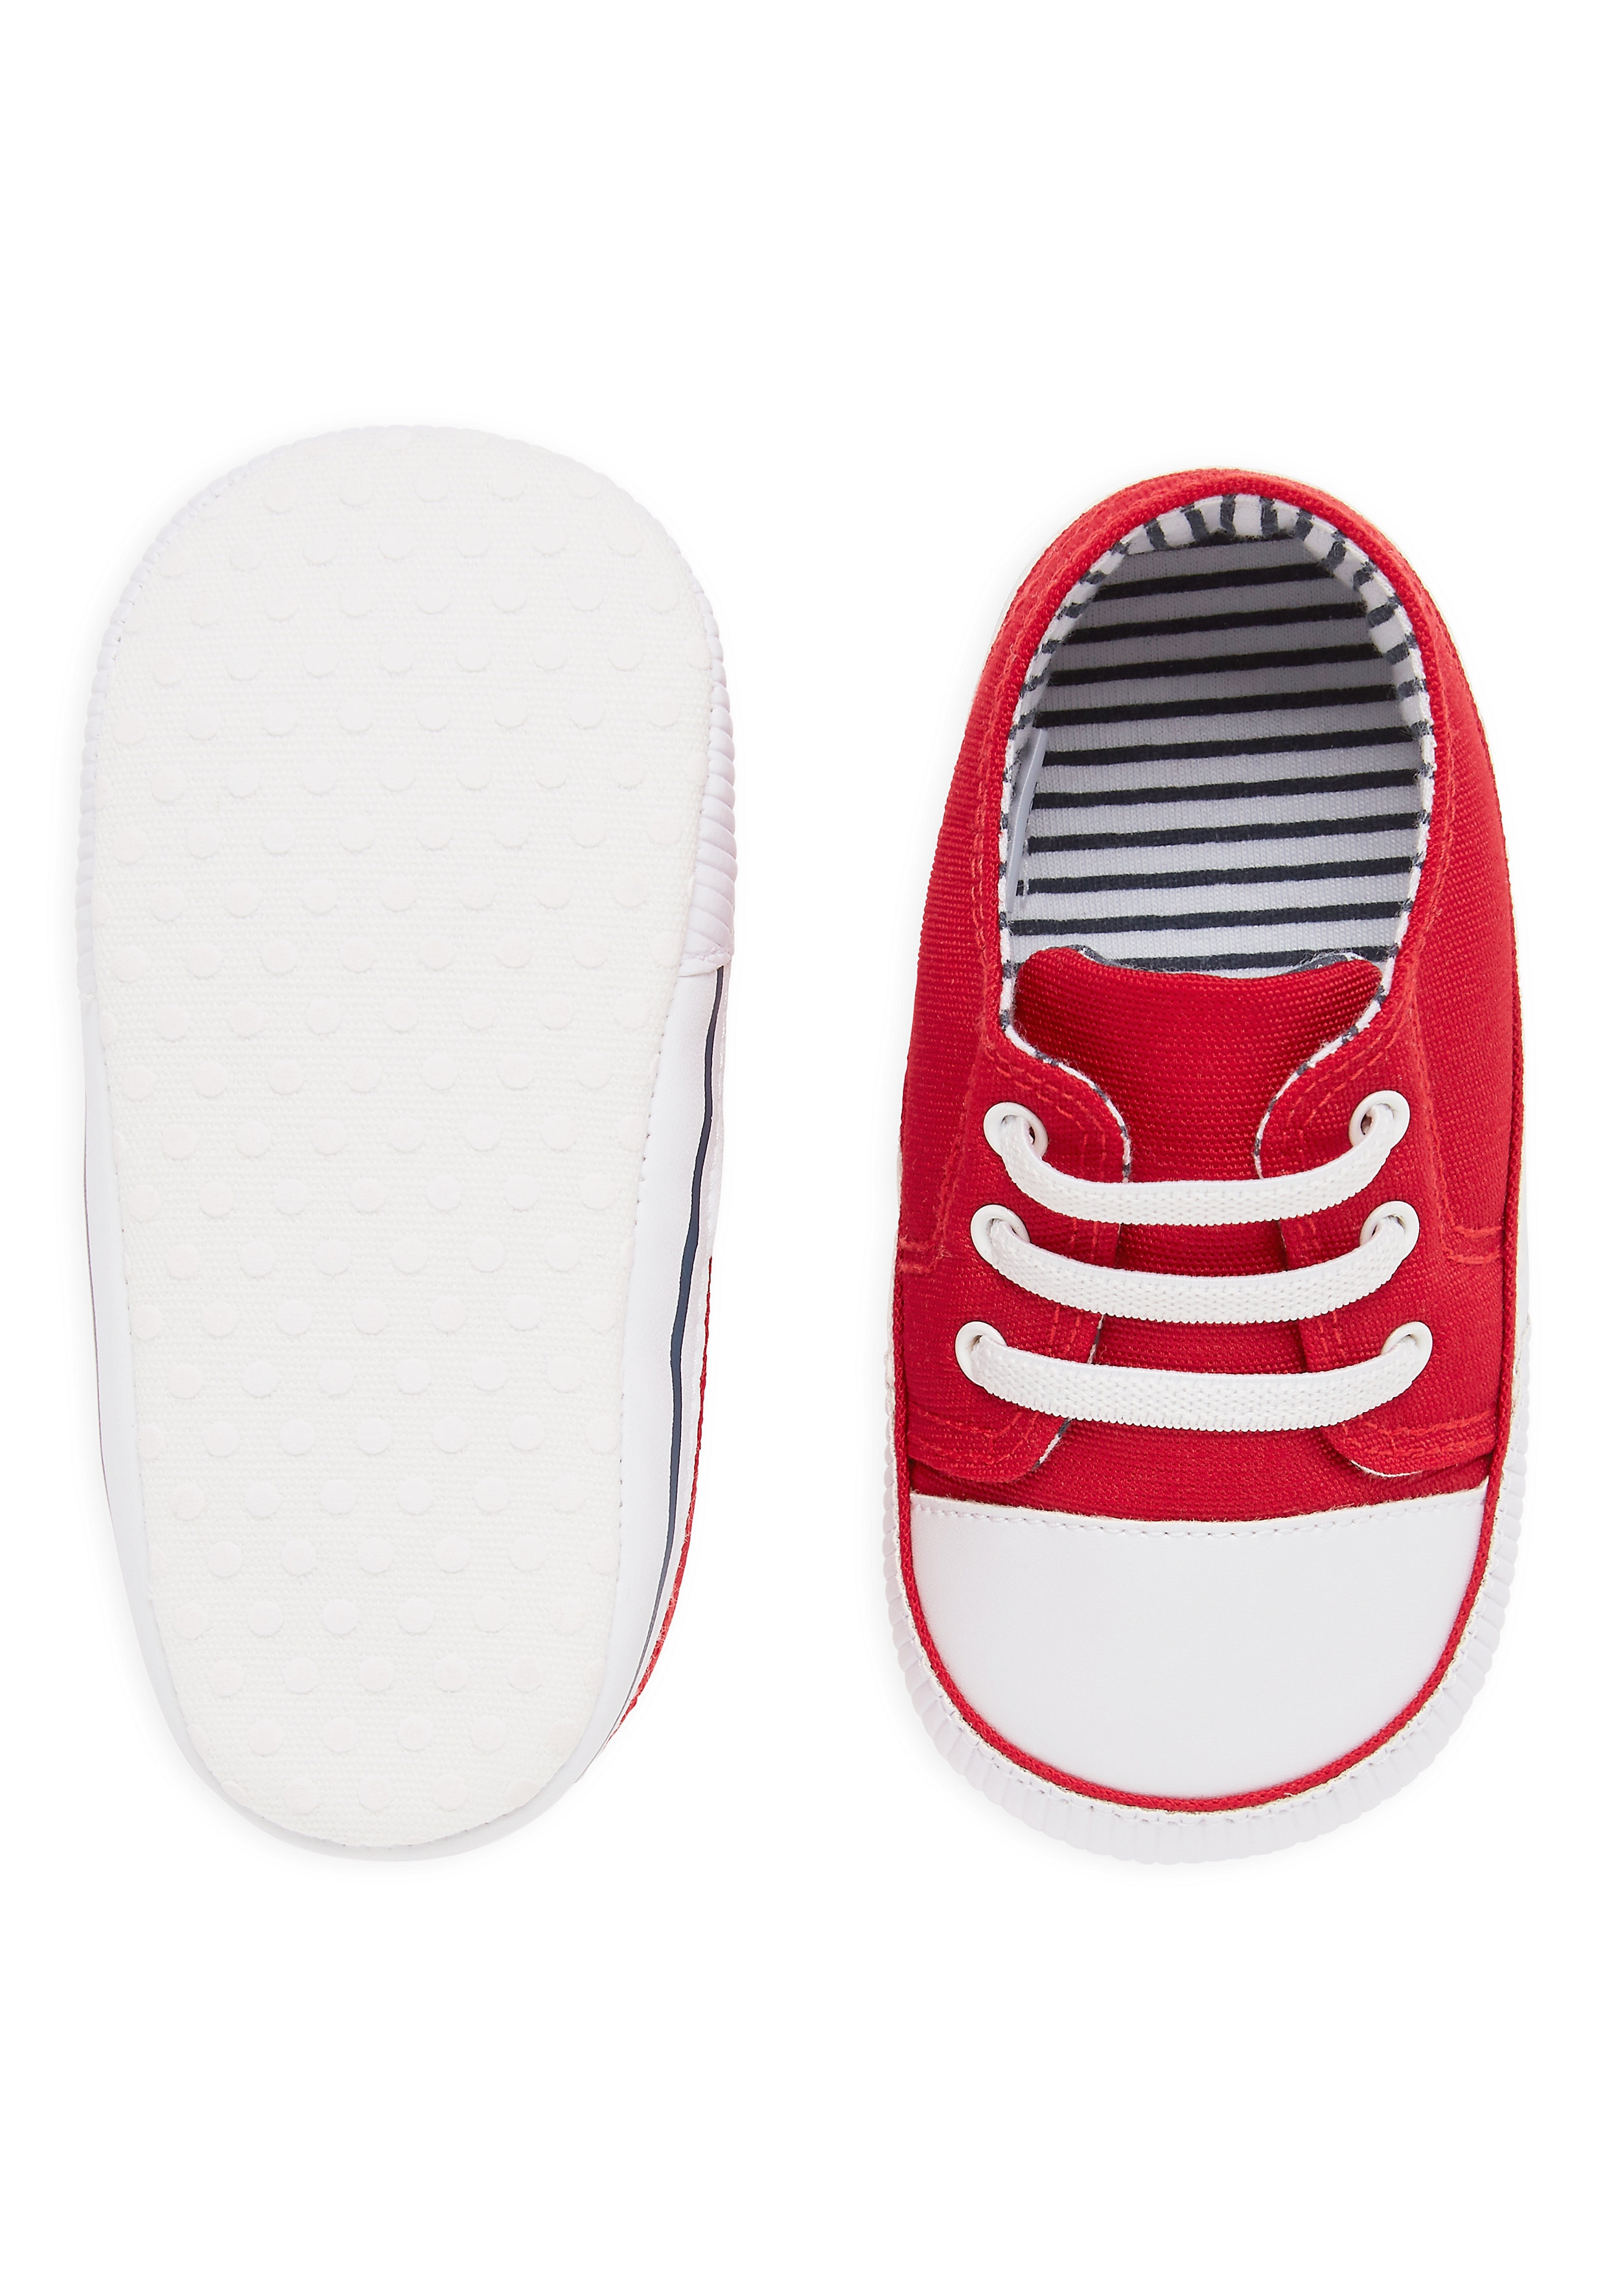 Mothercare | Boys Red Canvas Pram Shoes 2